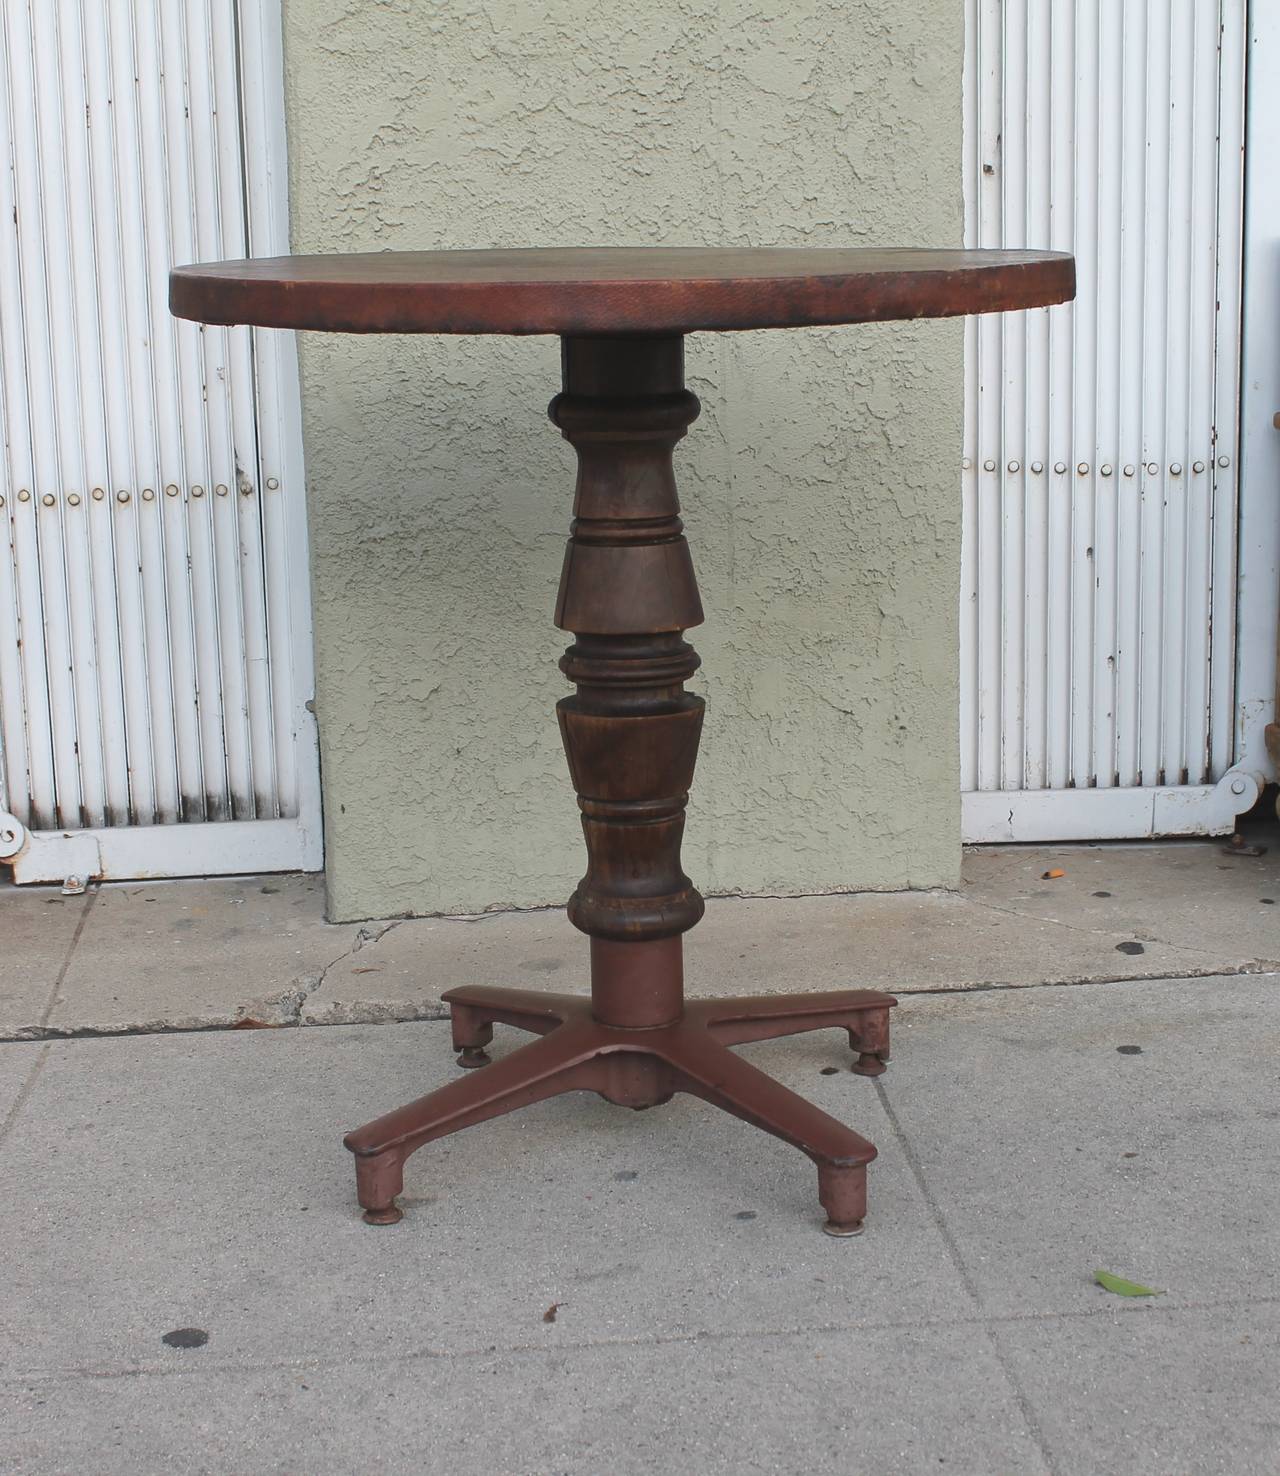 This early gaming Industrial gaming table with a leather top is in fantastic as found condition. This is the most unusual bar/gaming table or pub table we have ever seen. Makes a great side table in a rustic setting. The wood pedestal has a slight